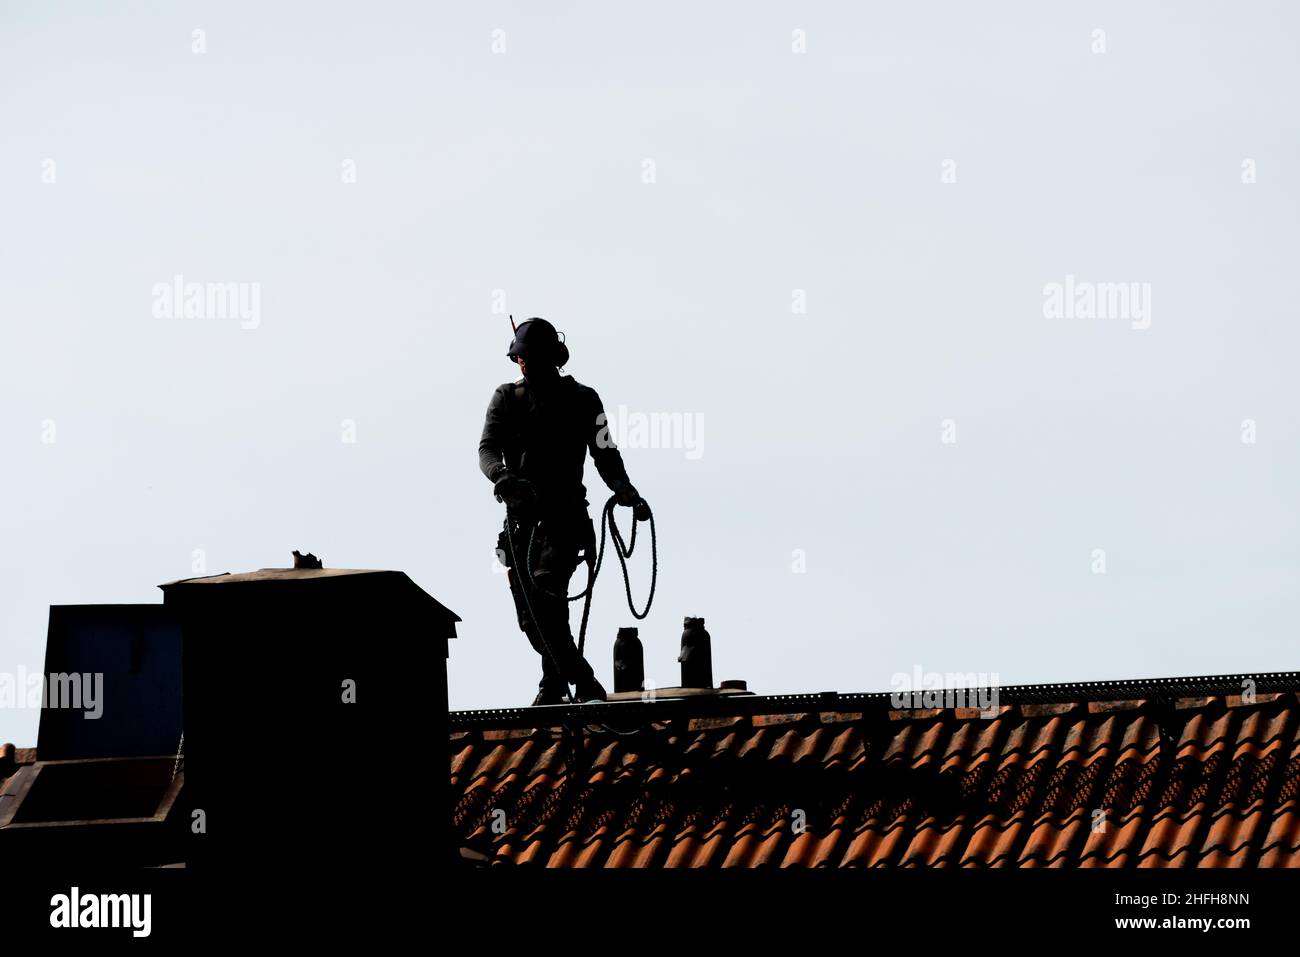 Gothenburg, Sweden - May 06 2020: Silhouette of a chimney sweeper on top of a roof Stock Photo